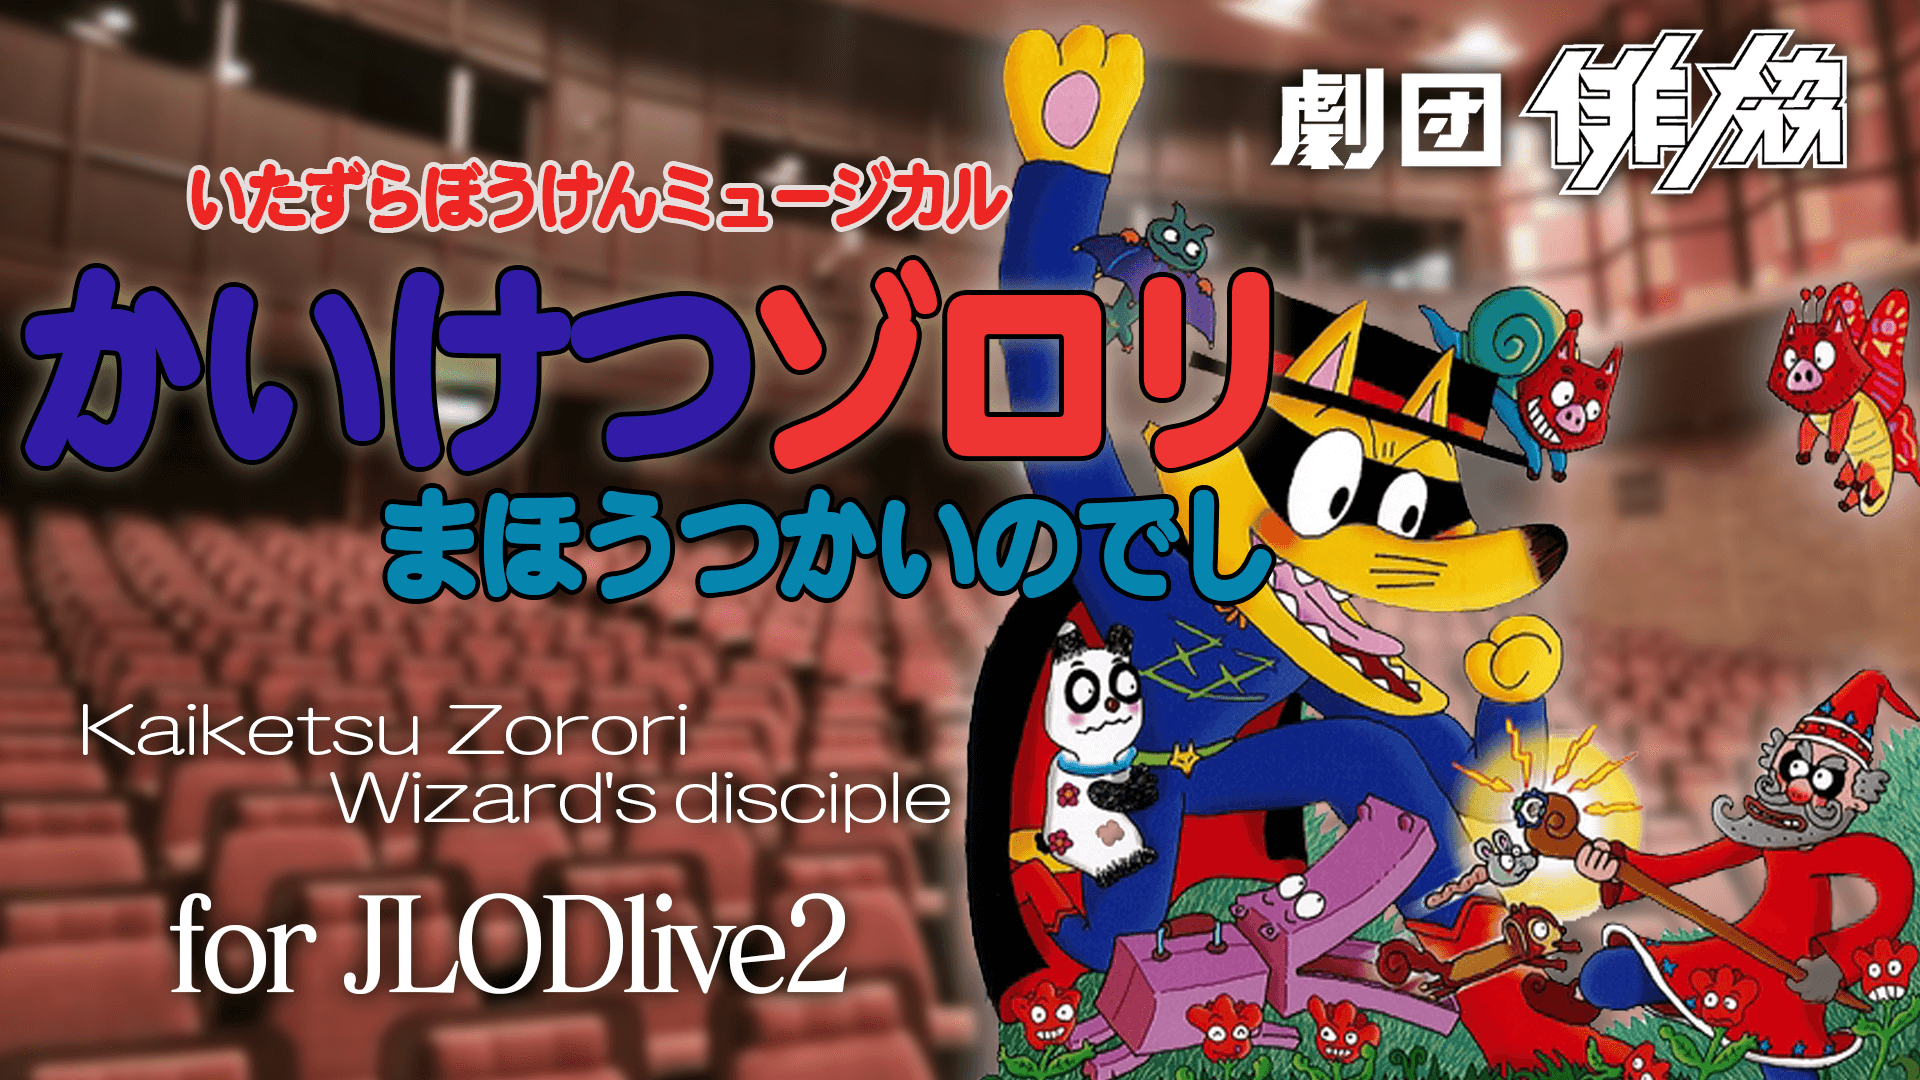 J-lodlive2_ゾロリ_サムネ.png